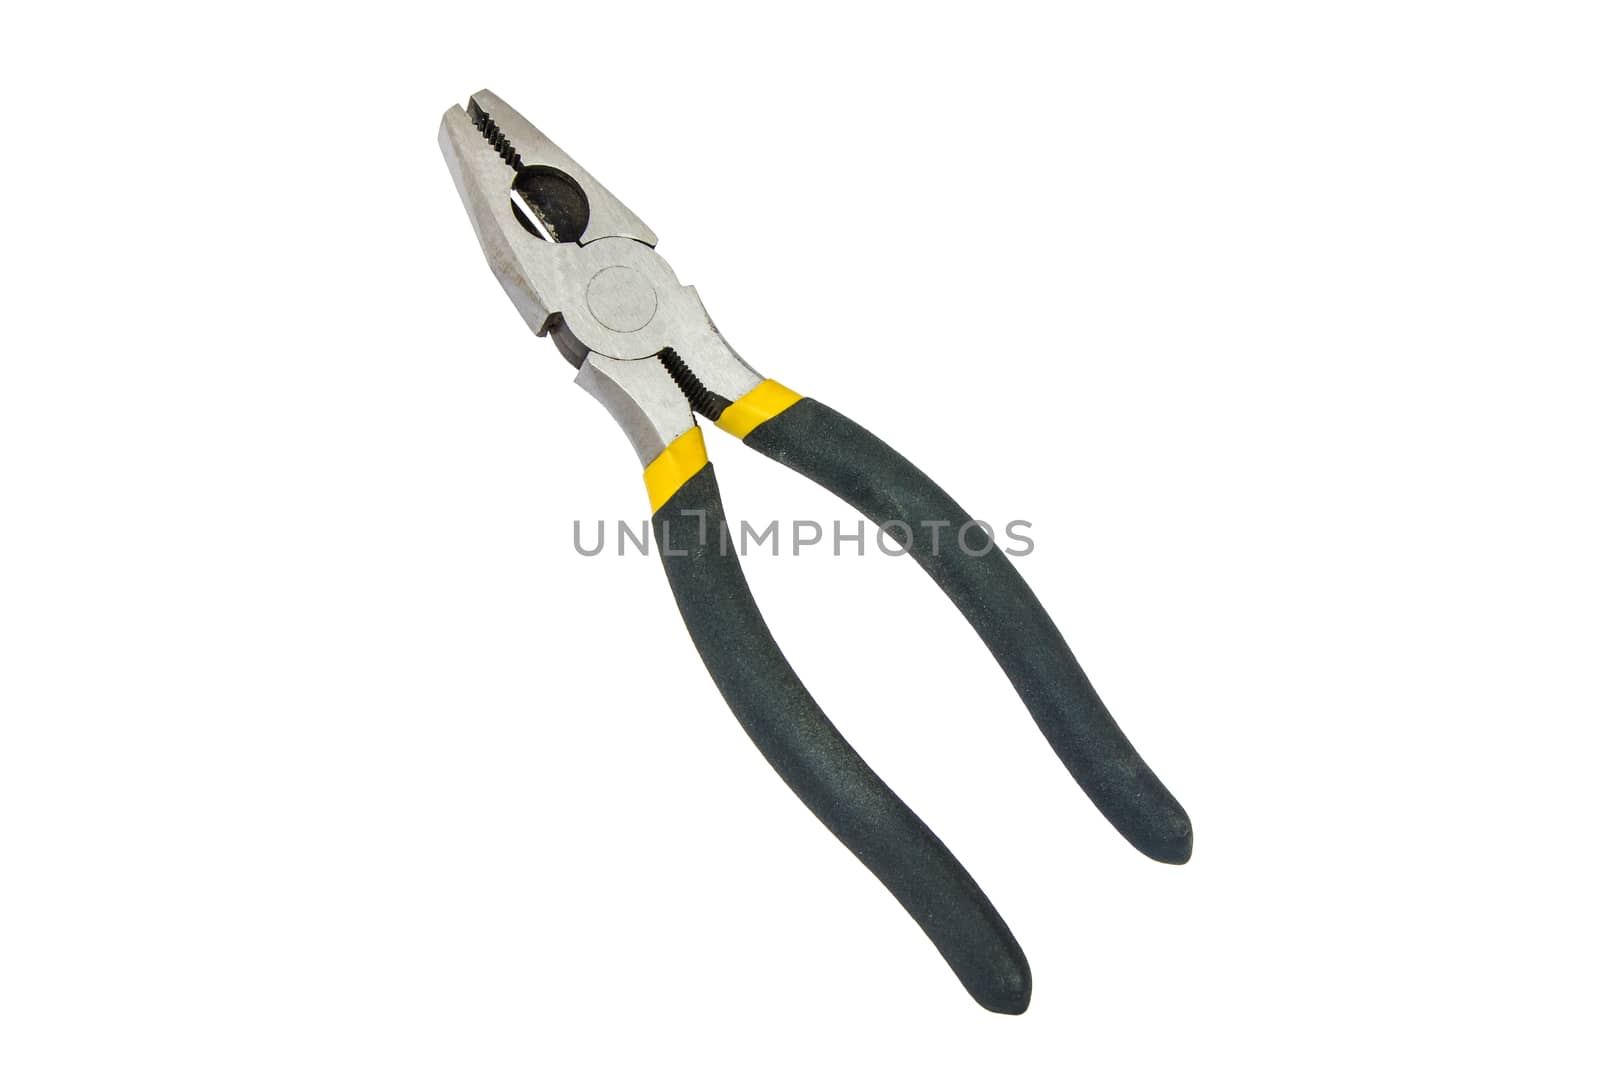 Brand new tongs on white background